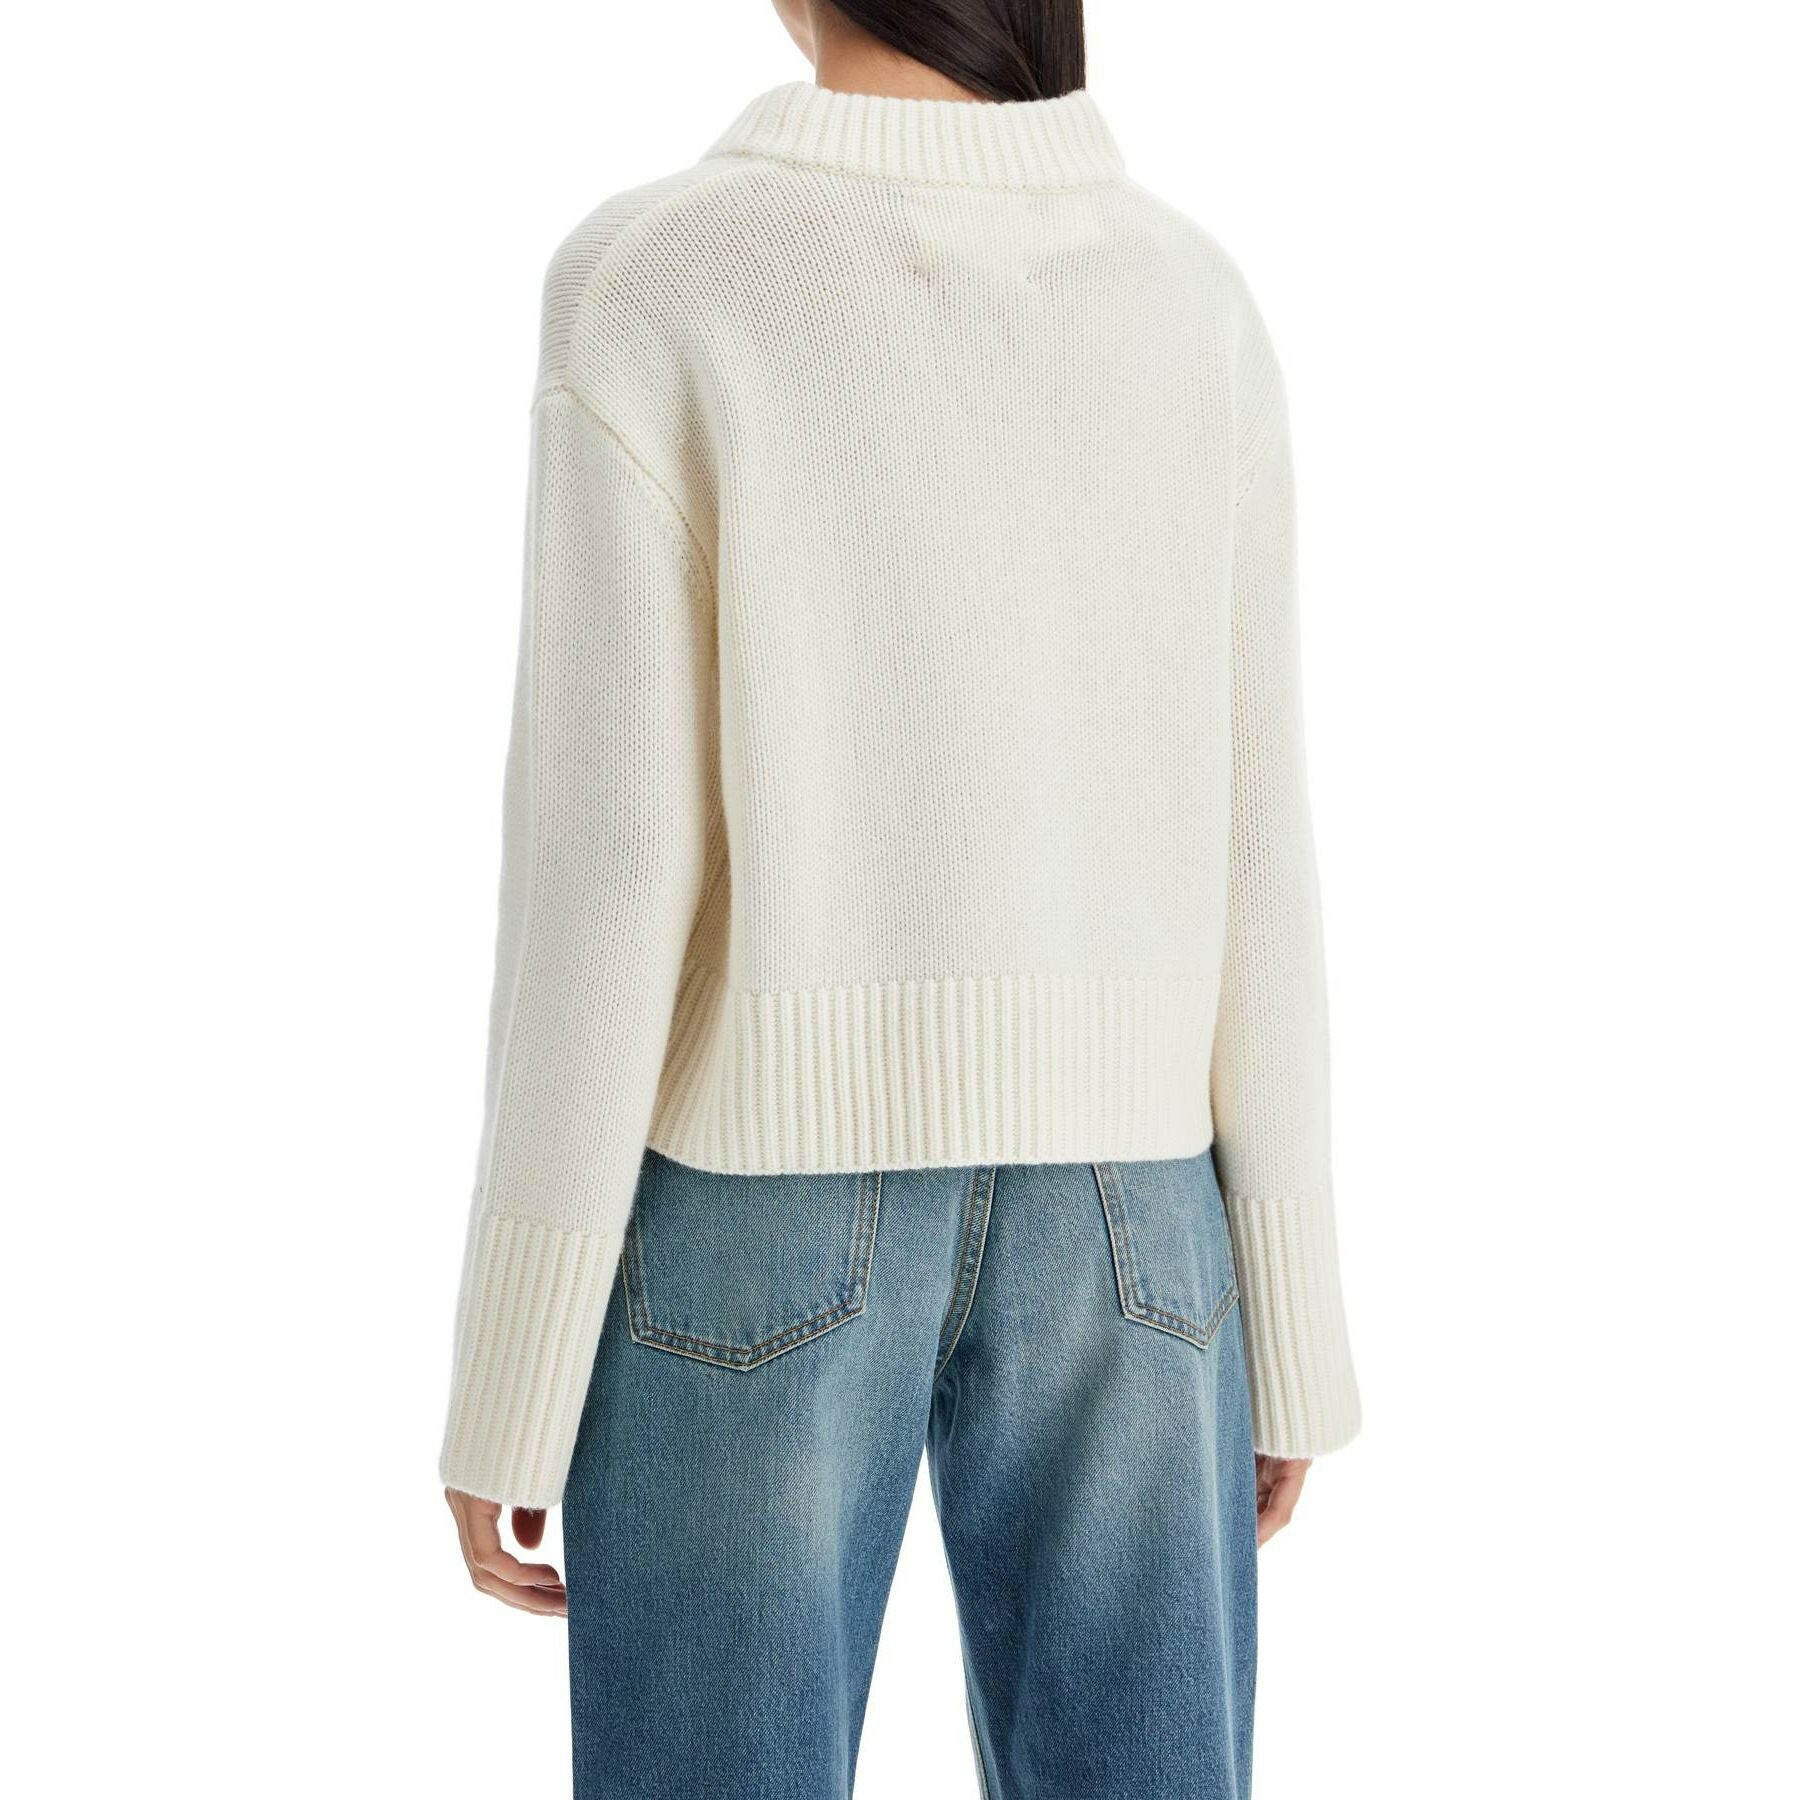 Cashmere Sony Pullover Sweater.